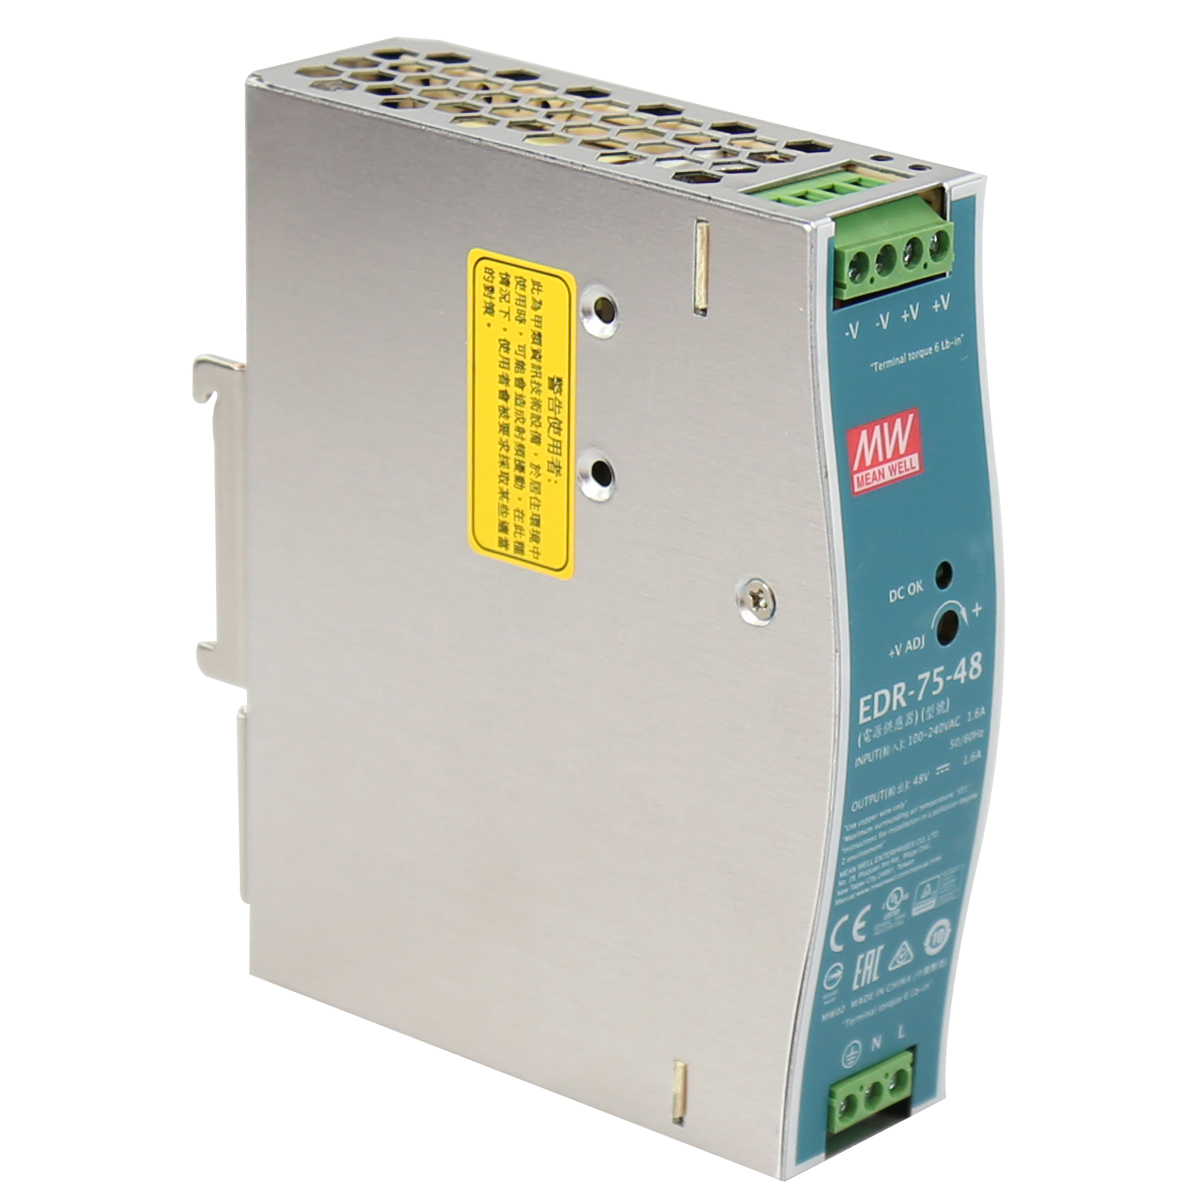 EDR-75-48 - MEAN WELL Hardened Industrial Power Supply AC/DC DIN-Rail 48V 75W DC 1.6A